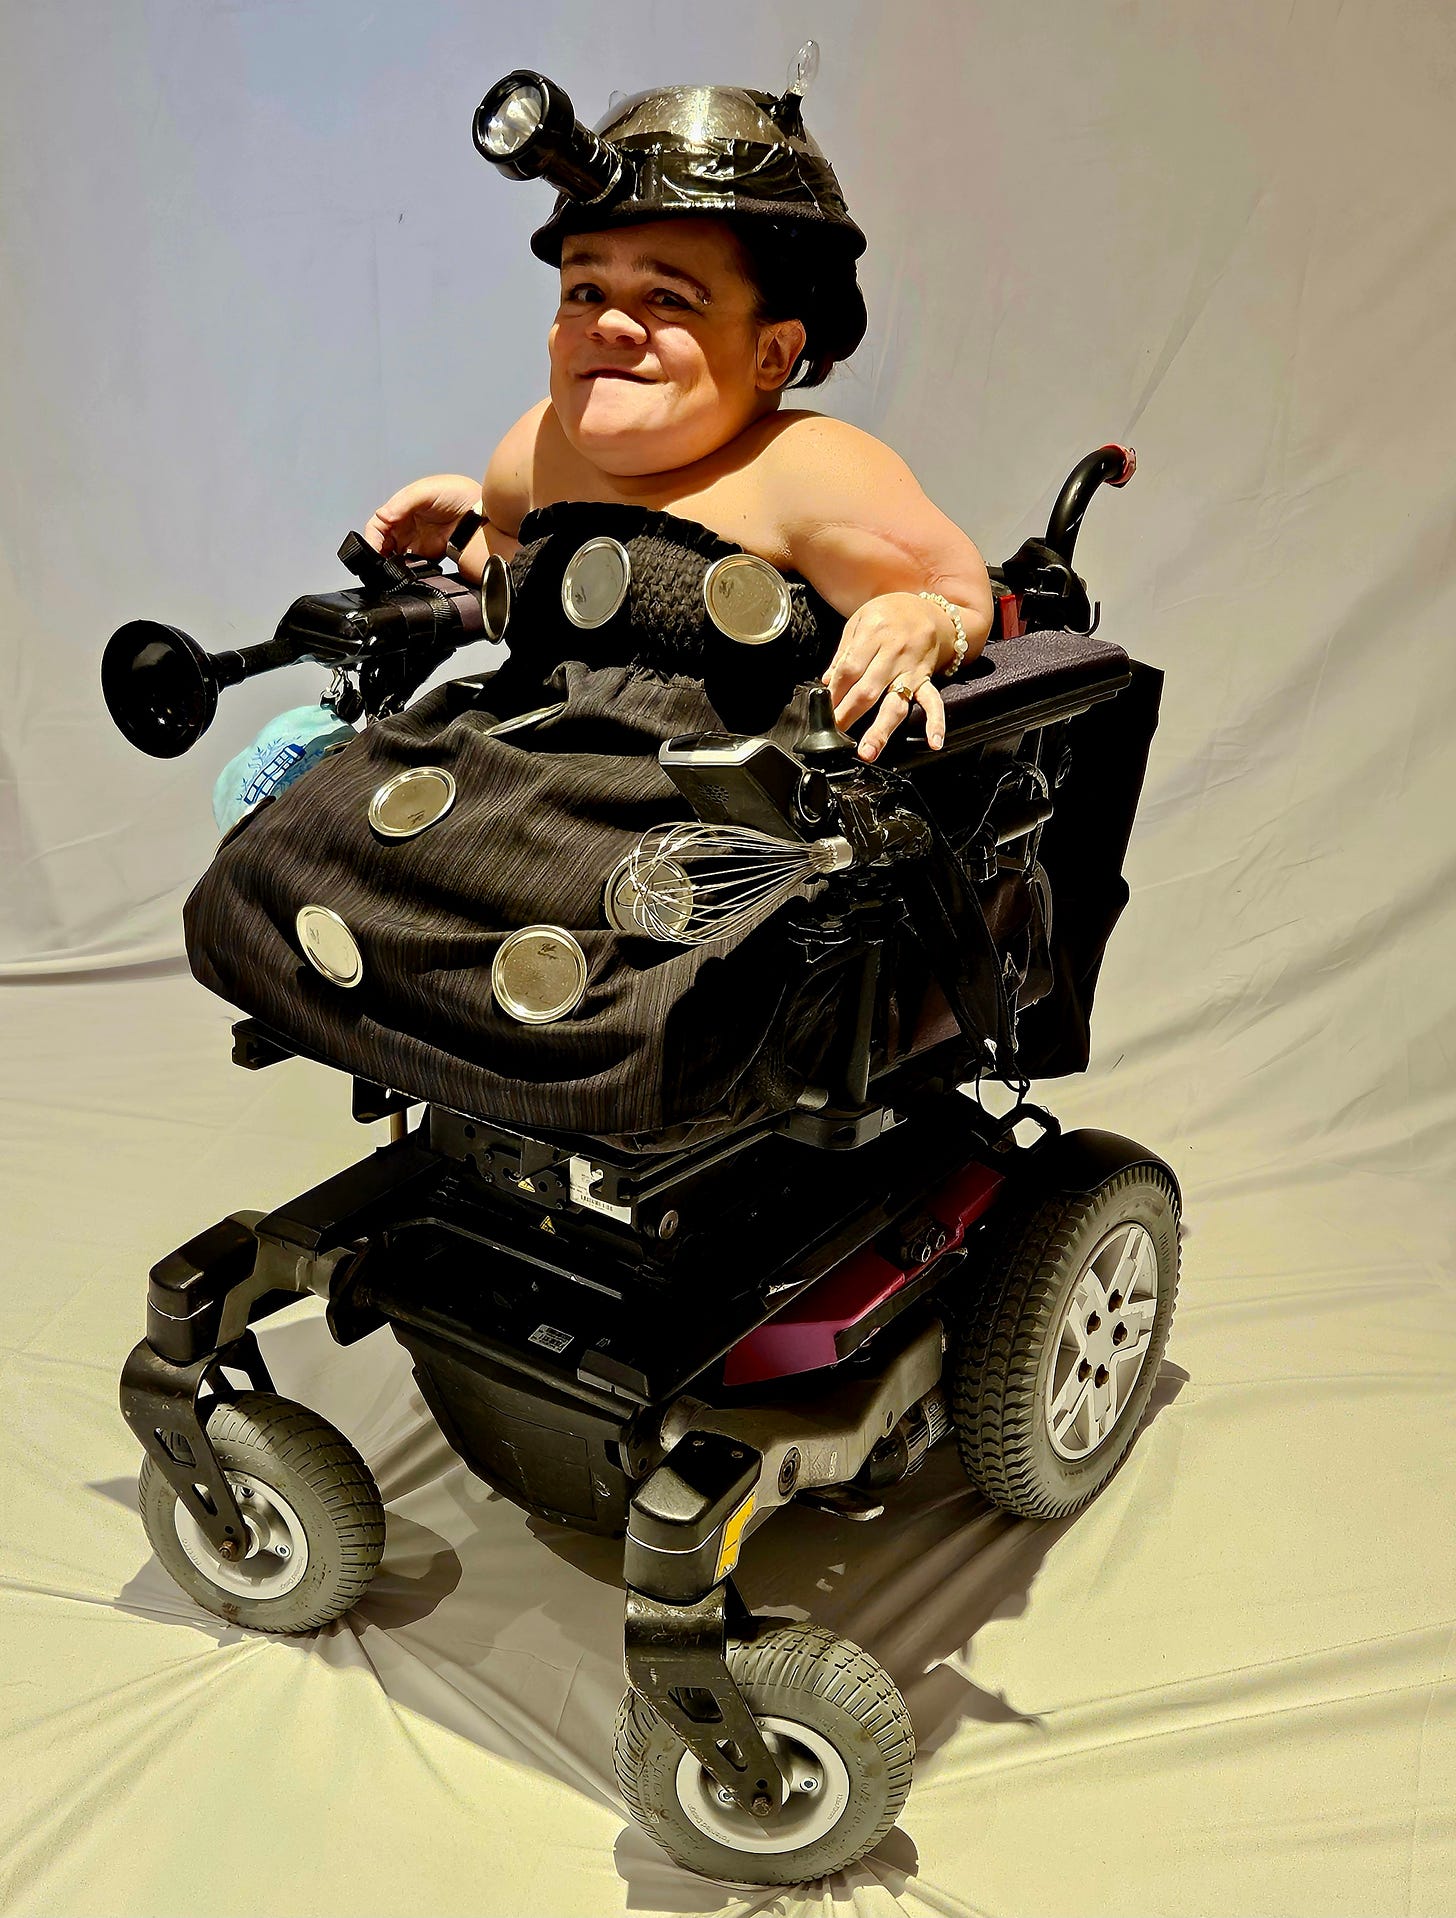 Costume consists of a mixing bowl on her head, with a flashlight attached to the front like an eyestalk. There is a black plunger on her left wheelchair armrest, a whisk attached to her right wheelchair armrest, and 12 silver jar lids attached to her black dress to represent the circular shapes on the Dalek's armor.